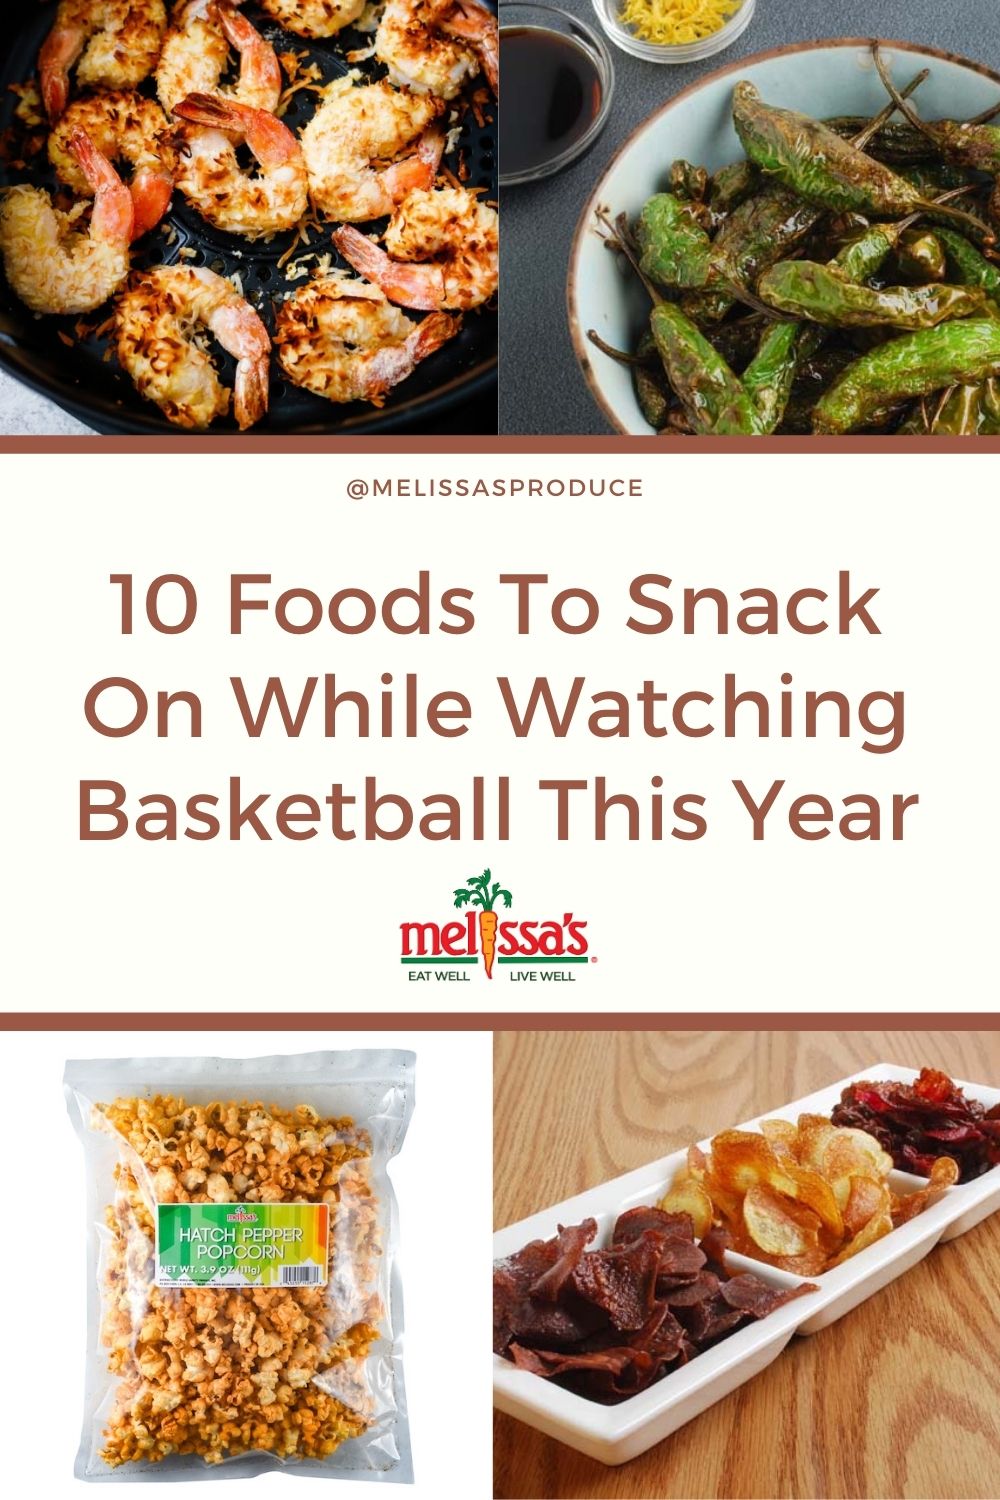 10 Foods To Snack On While Watching Basketball This Year